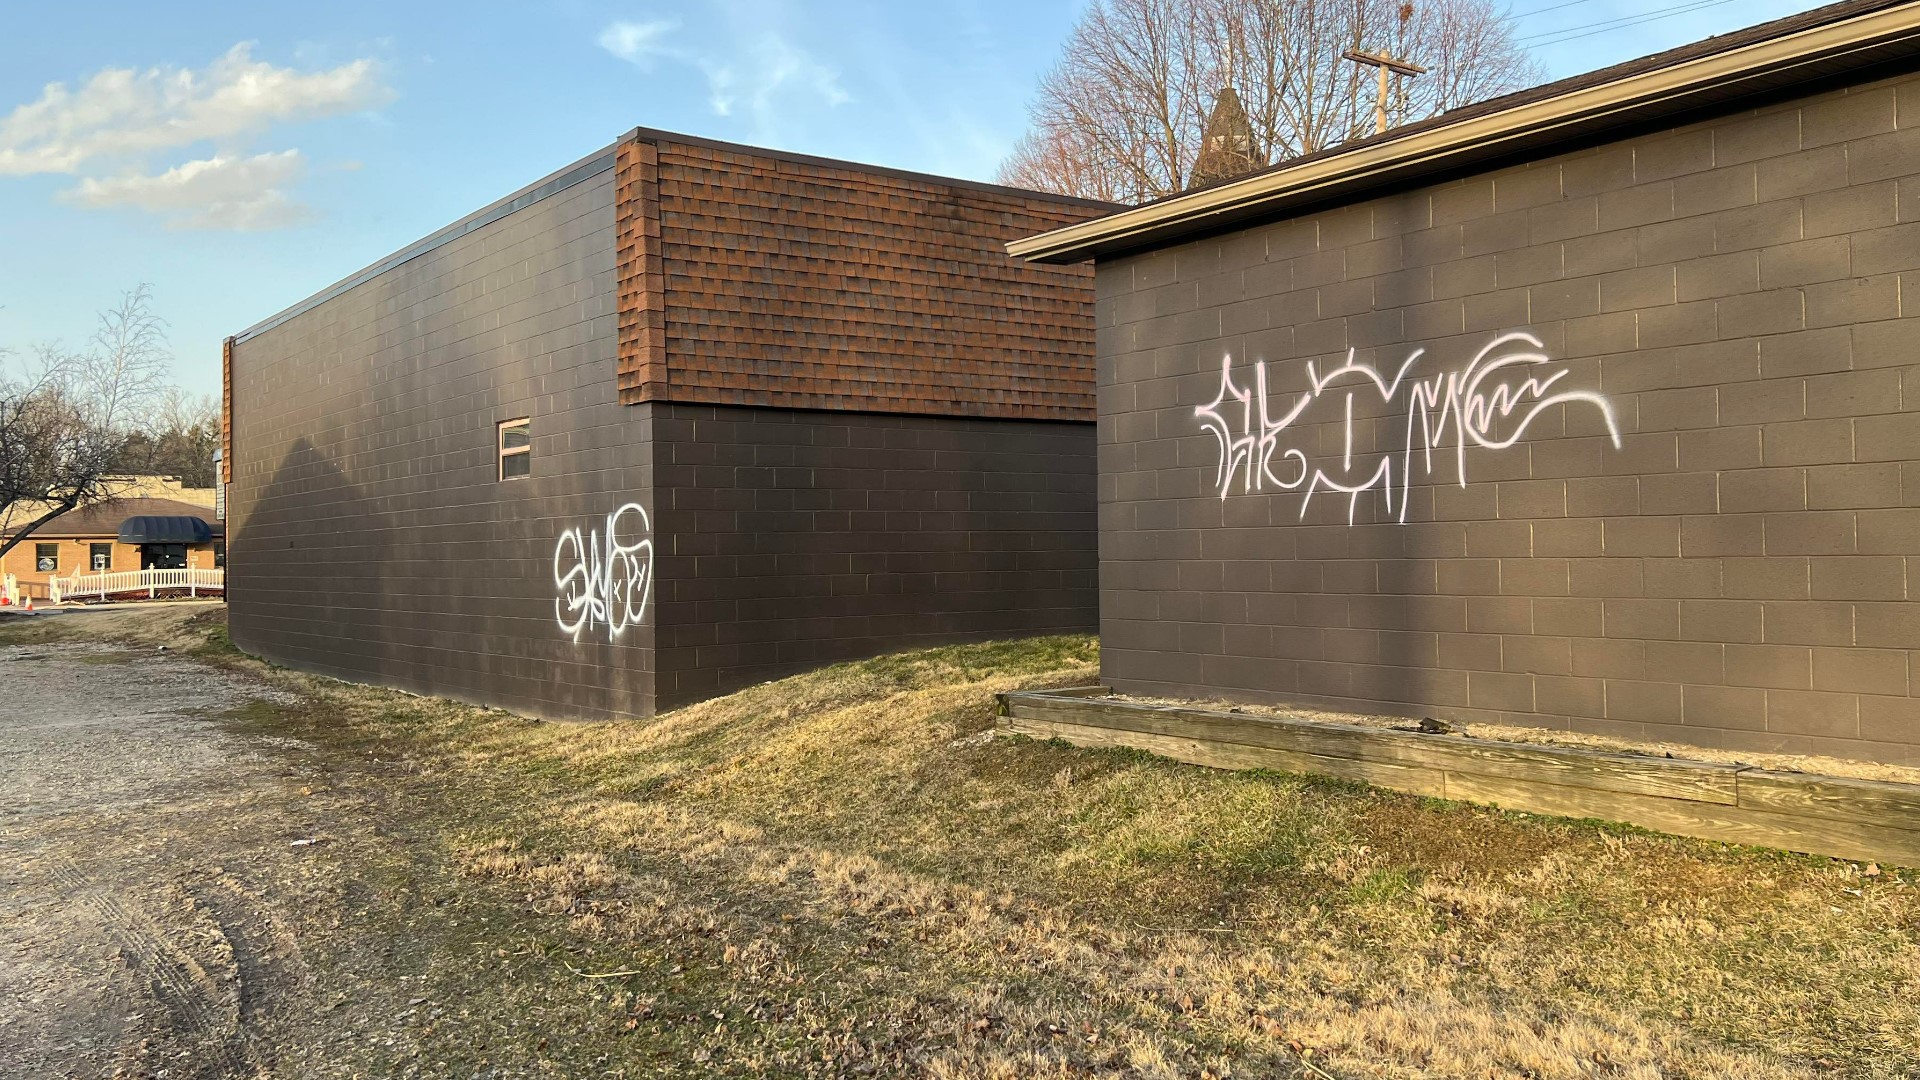 According to the Reynoldsburg Police Department several items have been spray-painted in the last couple weeks.